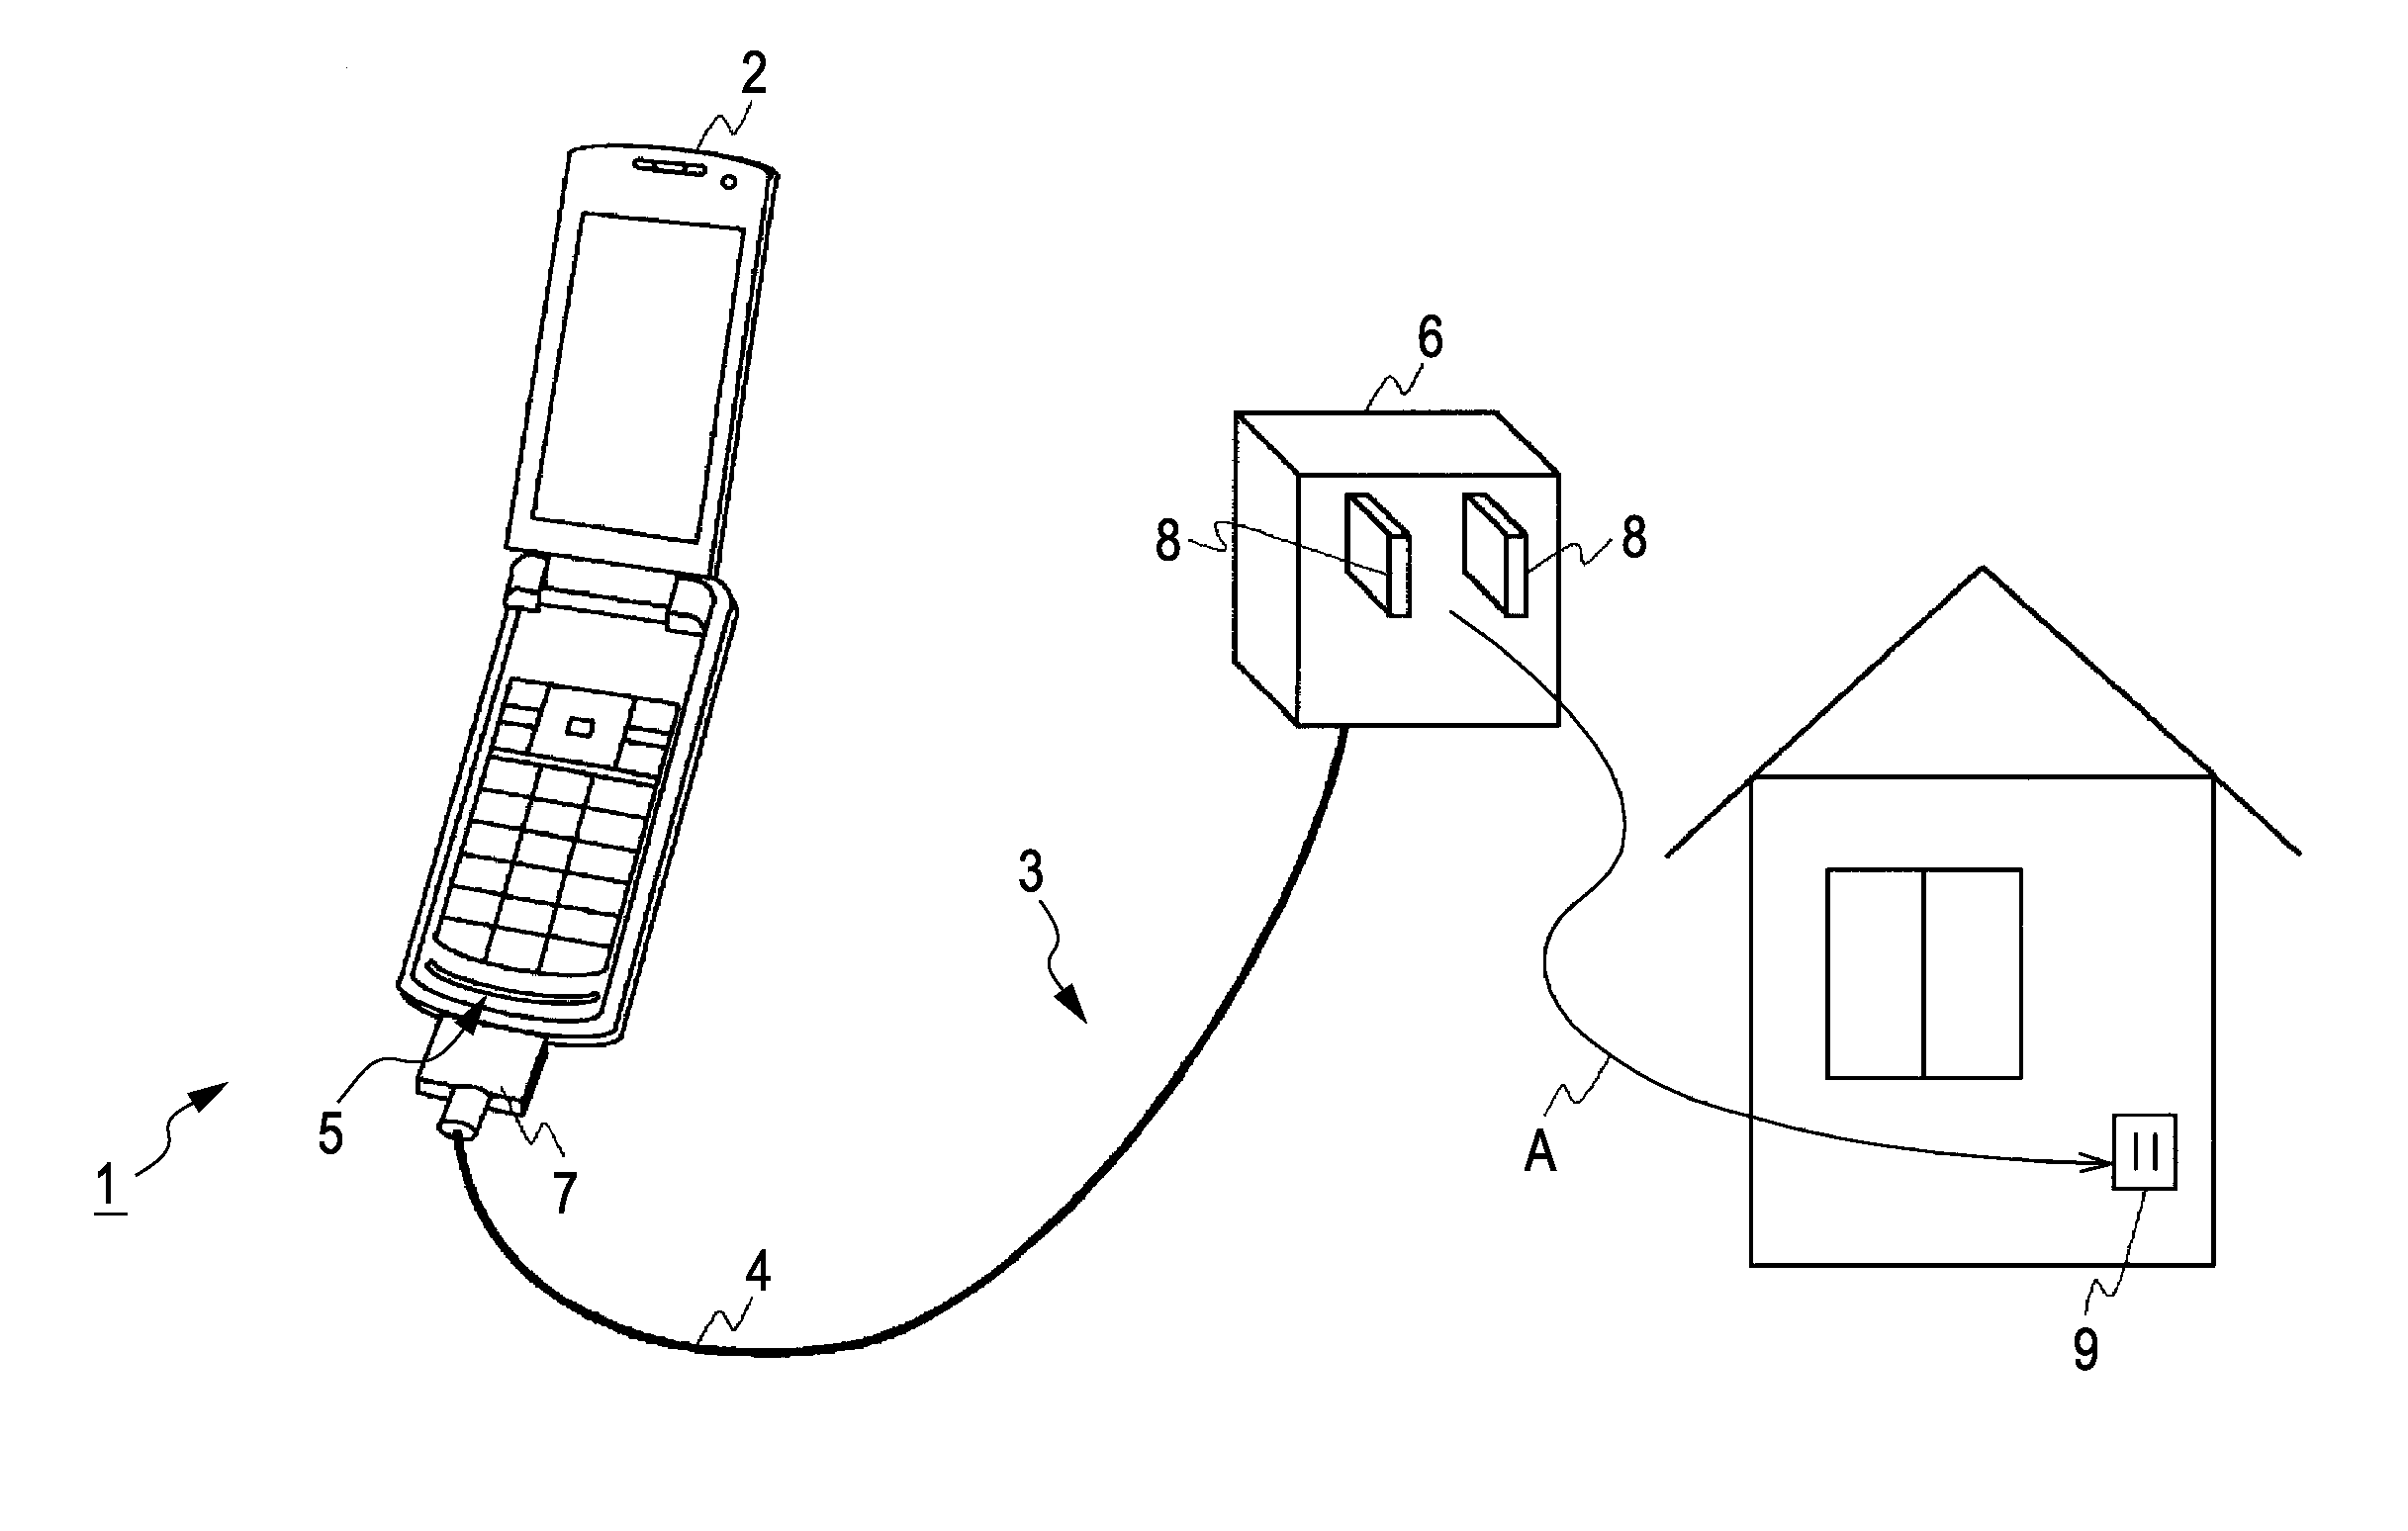 Power supply device, power cable, and reception device